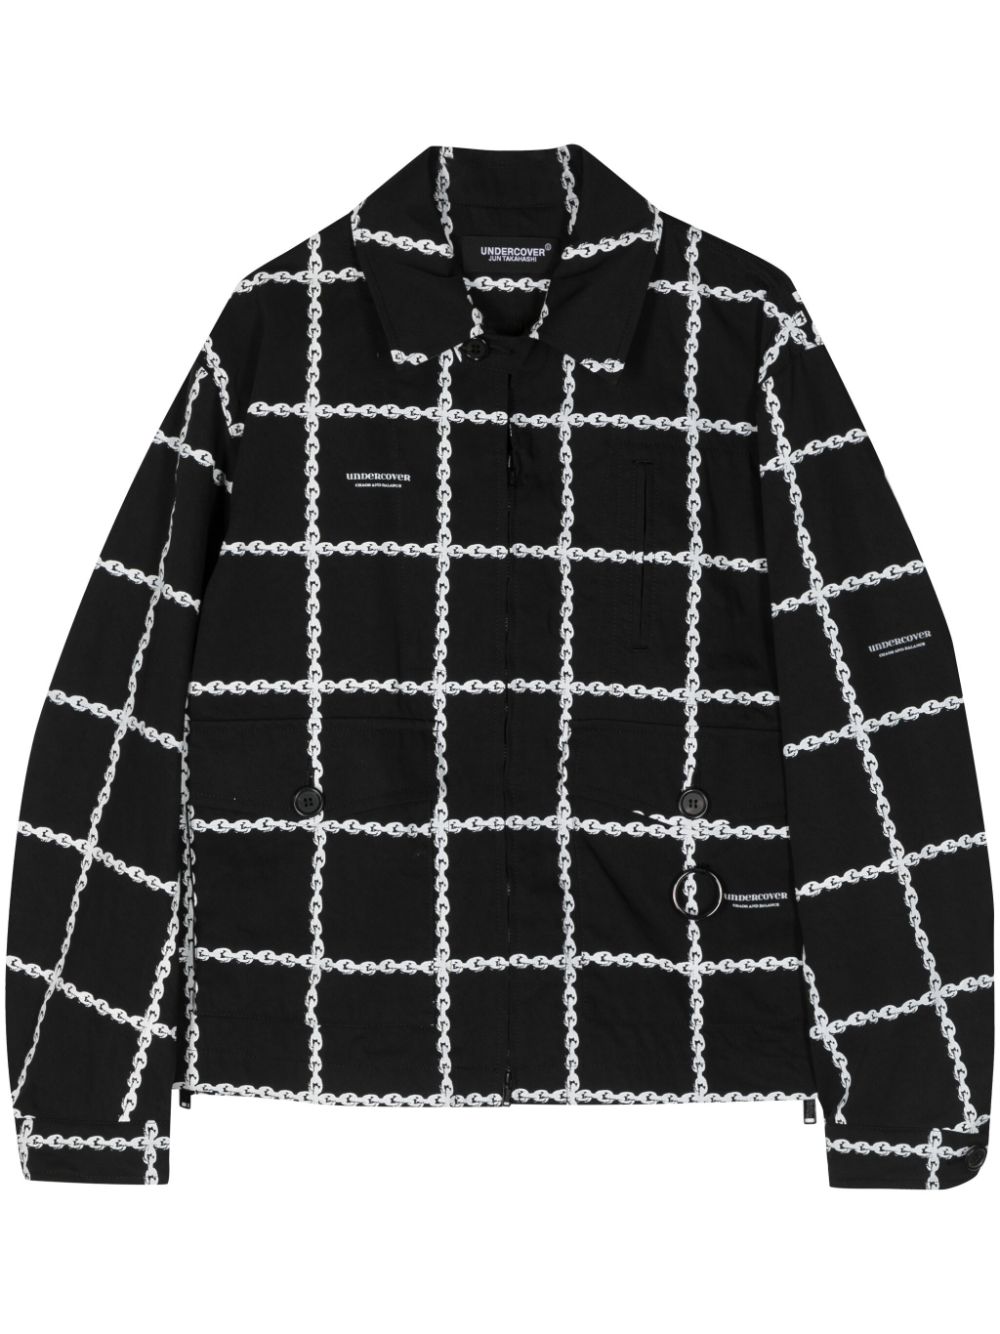 Undercover Chain-print Shirt Jacket In Black